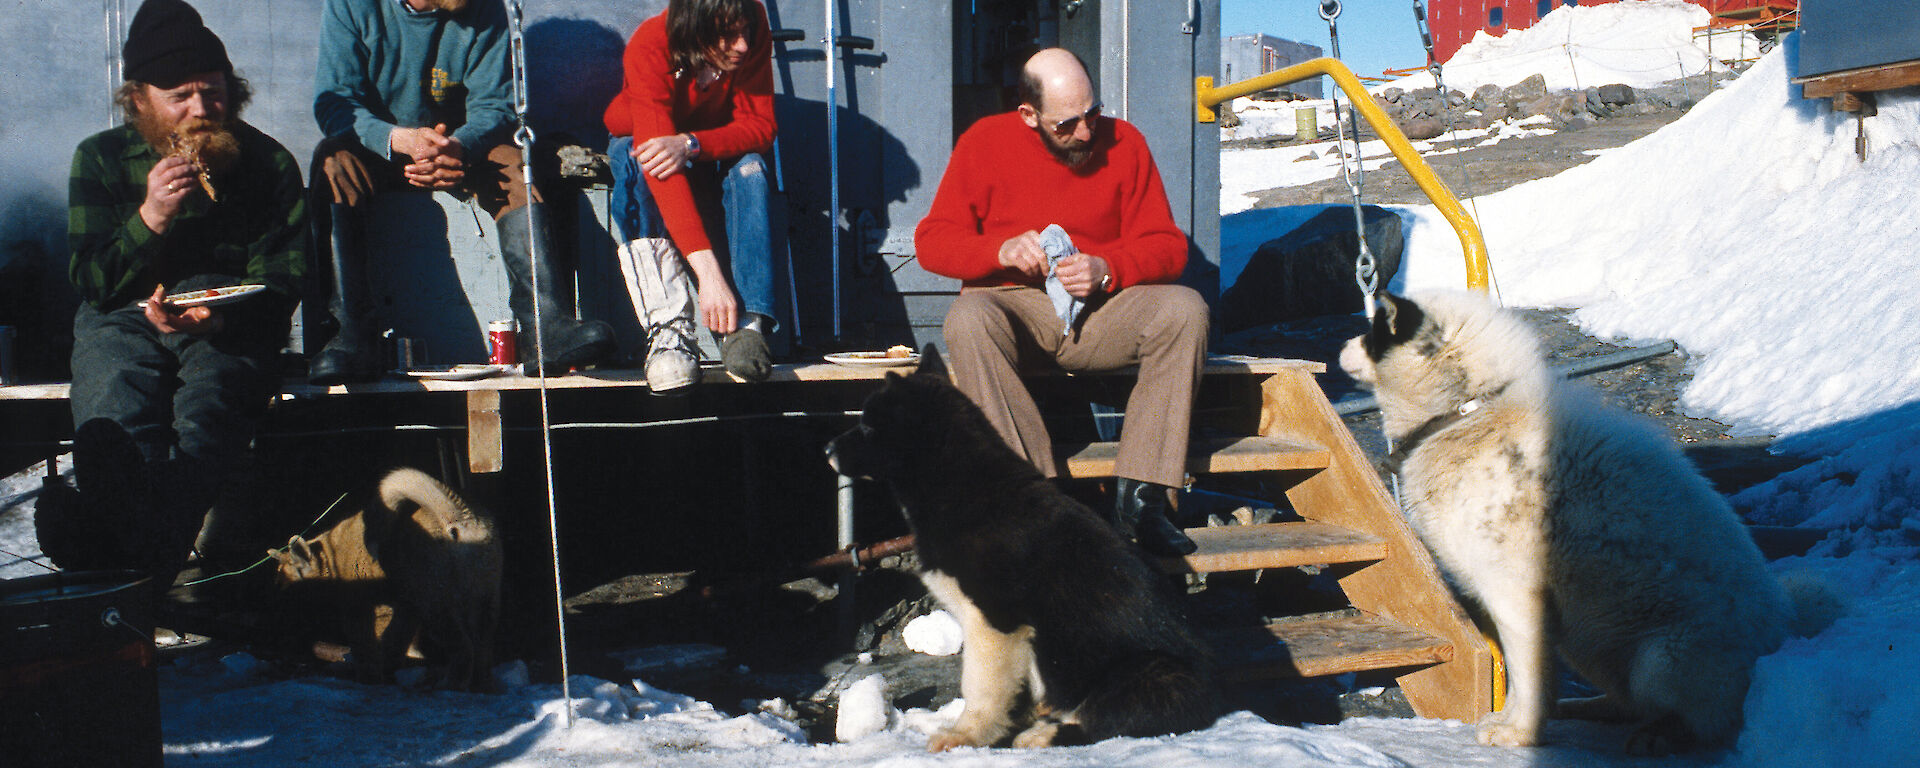 Tom sitting with other expeditioners on the steps outside a building at Mawson with huskies.